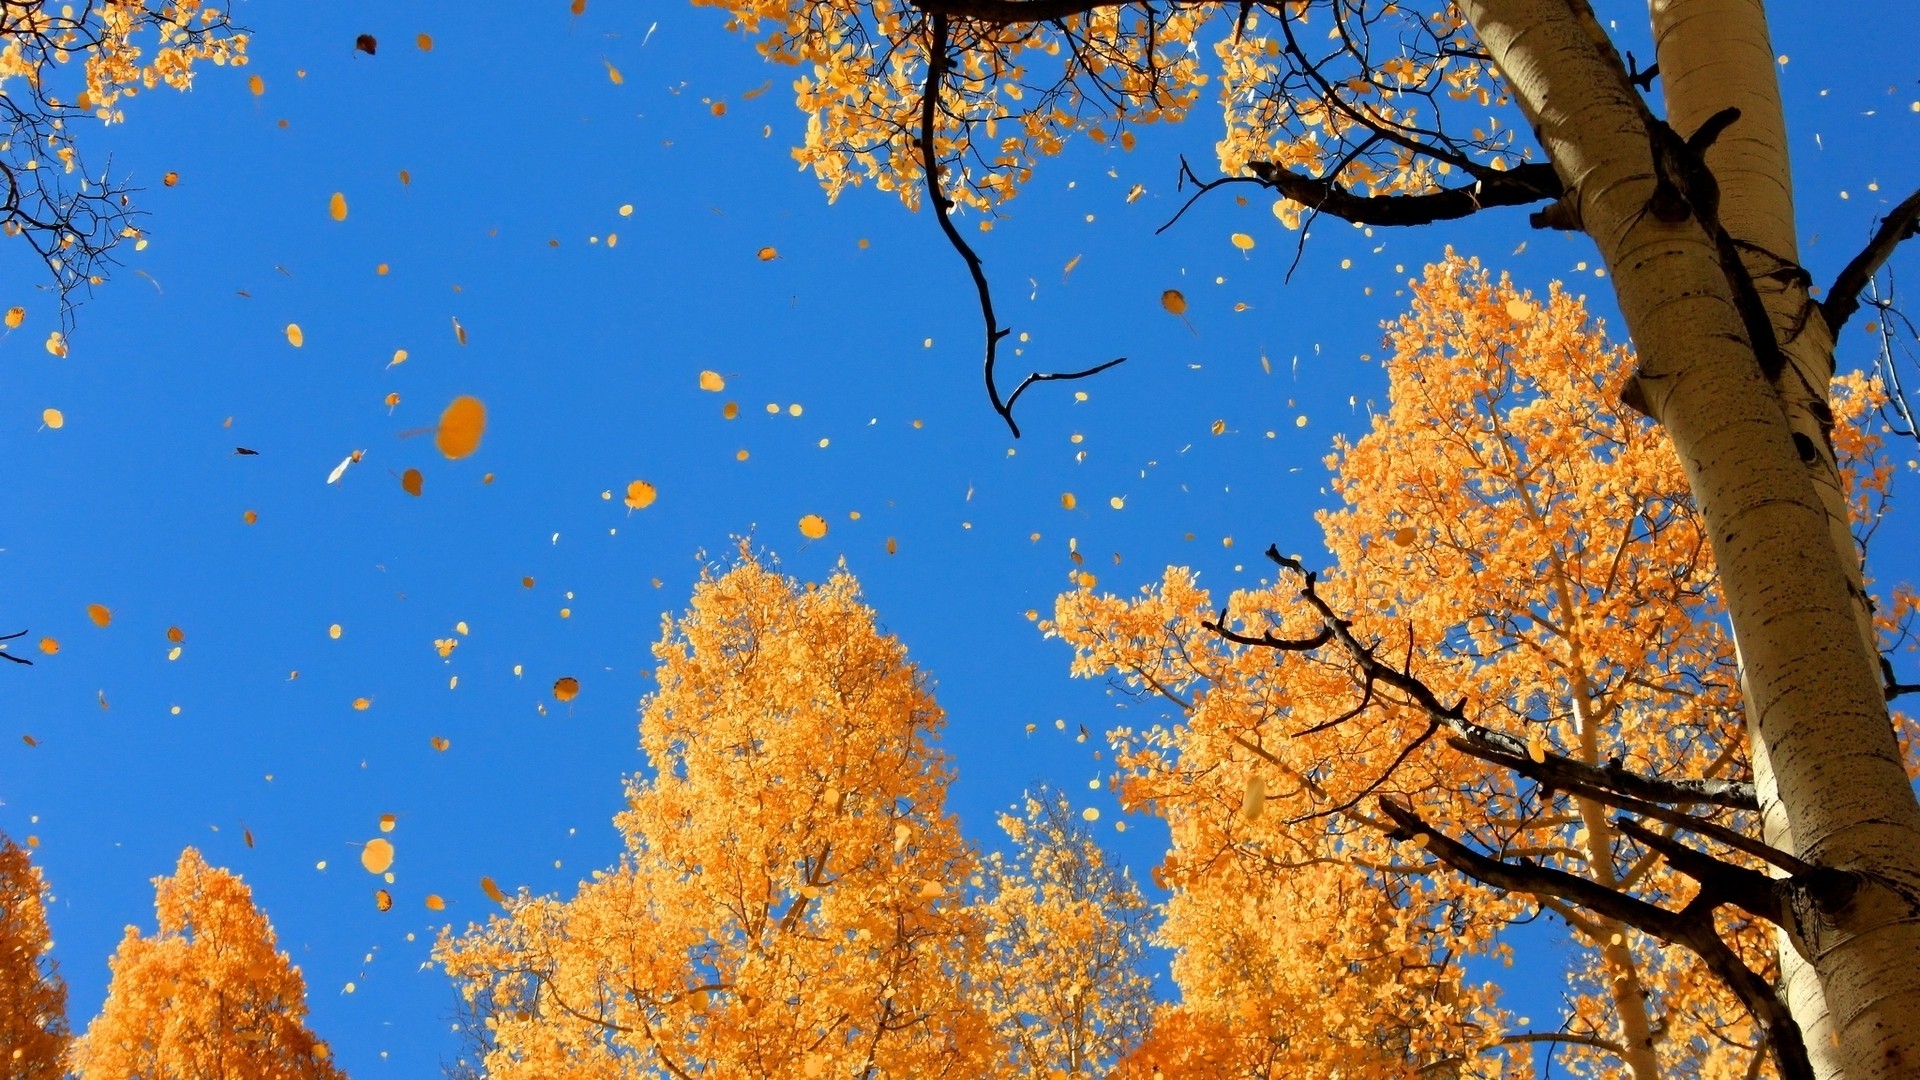 Other: Falling Leaves Yellow Autumn Branches Fall Sky Trees Dual ...